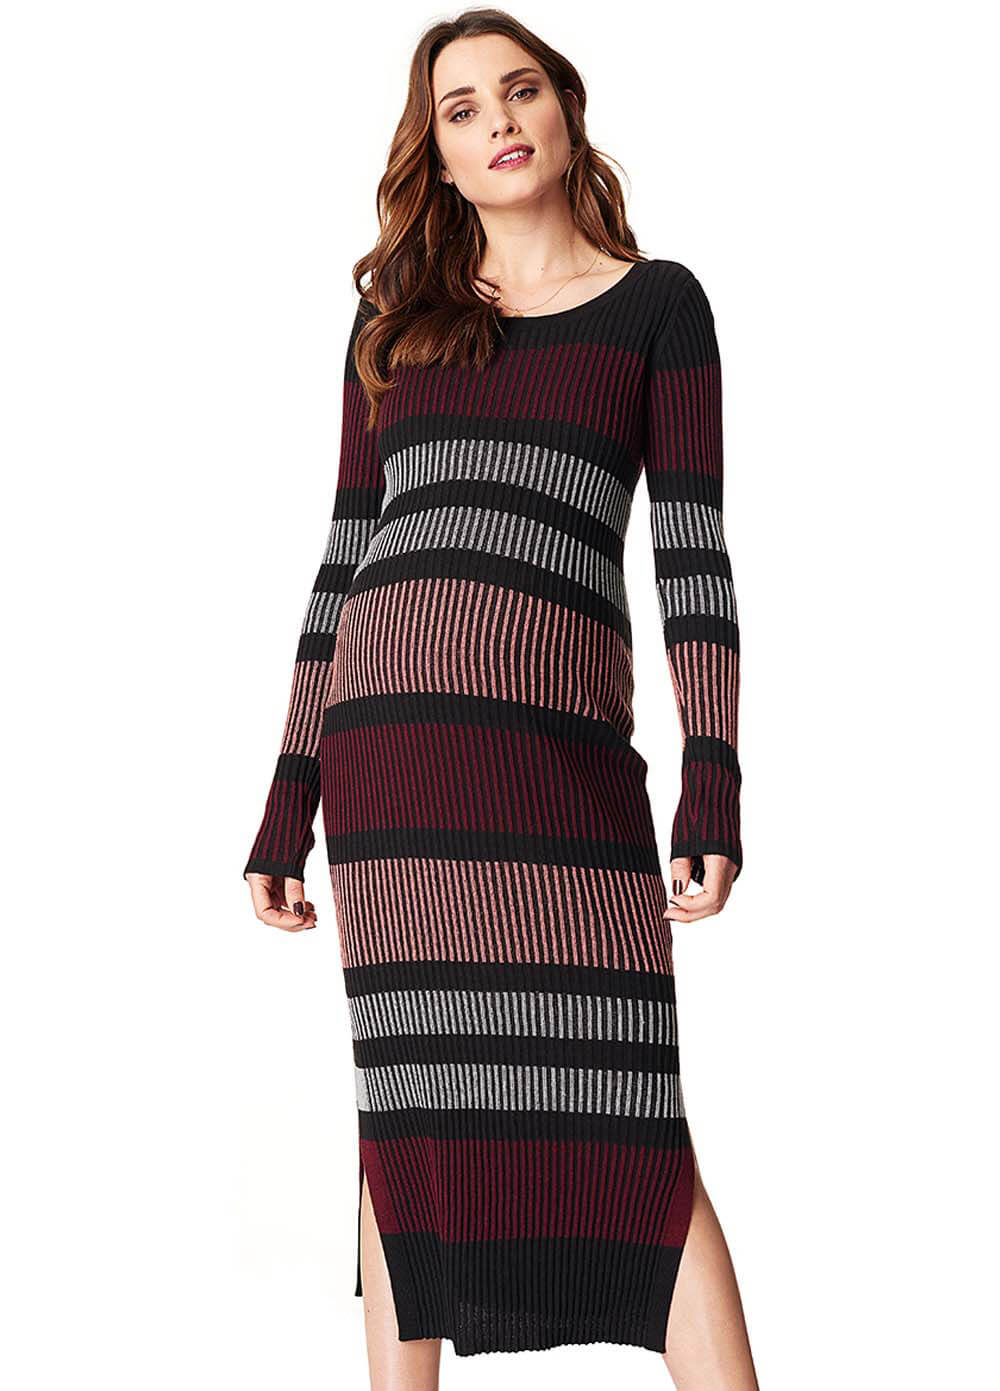 Queen Bee Jara Striped Knit Maternity Maxi Dress by Noppies